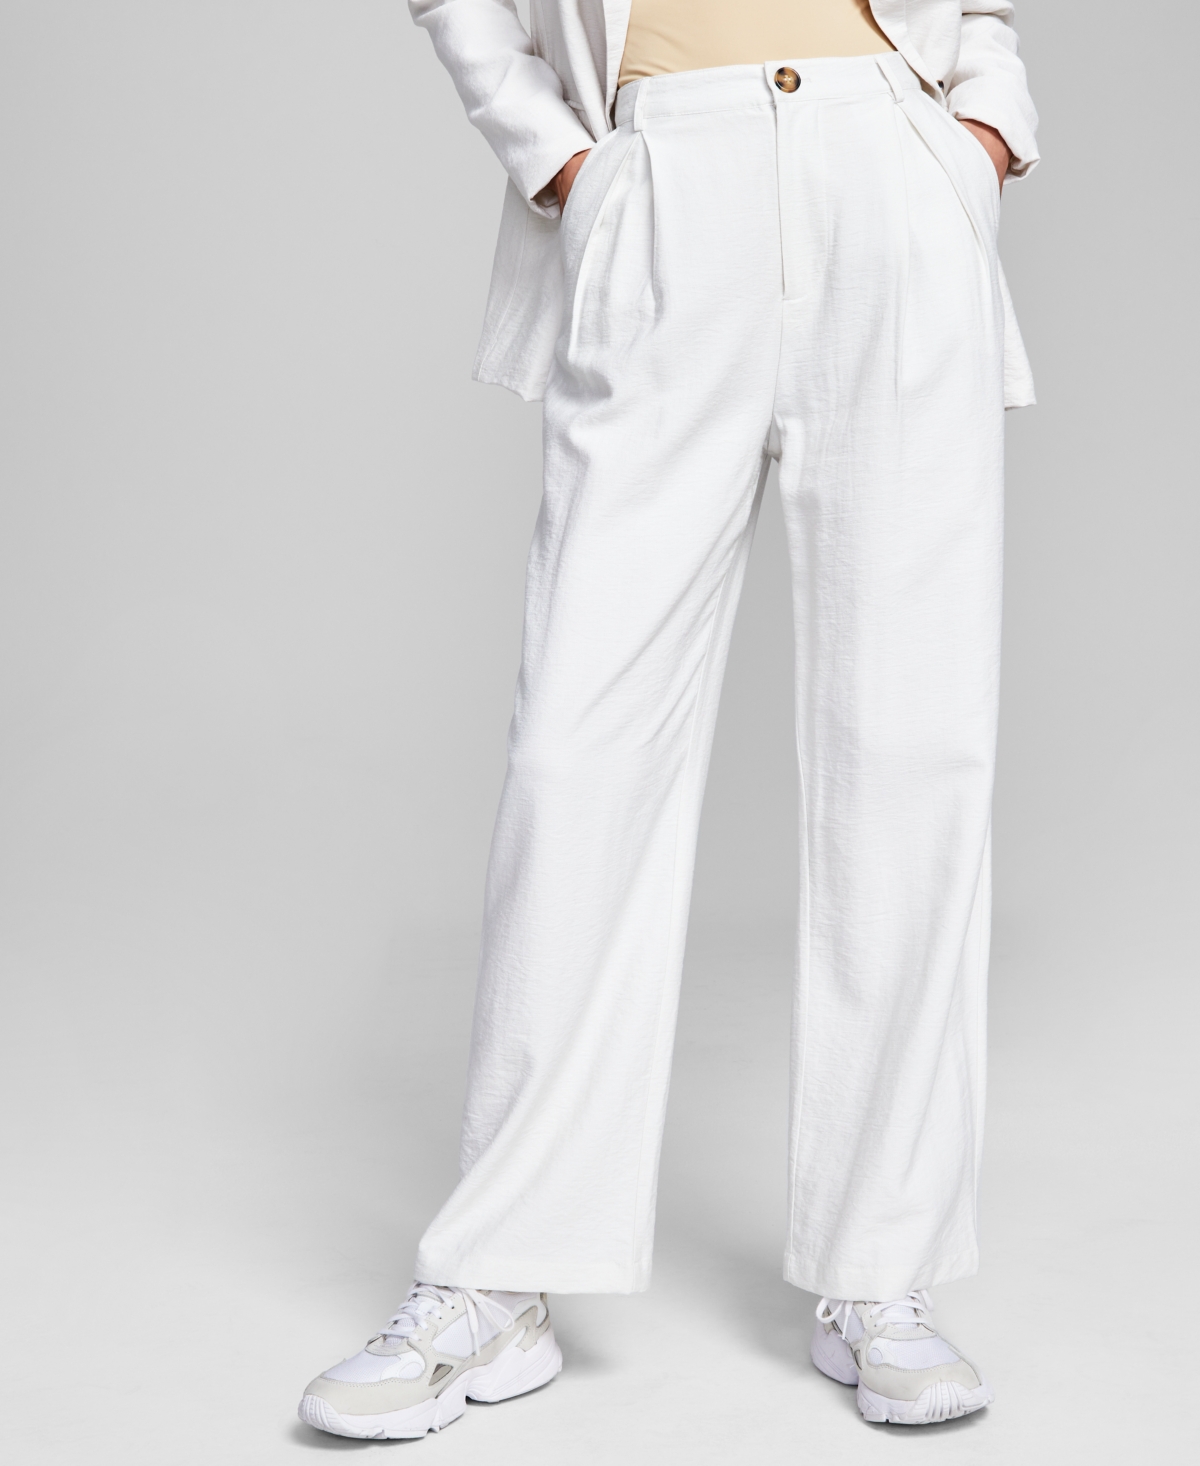 AND NOW THIS WOMEN'S HIGH-RISE WIDE-LEG TEXTURED TROUSER PANTS